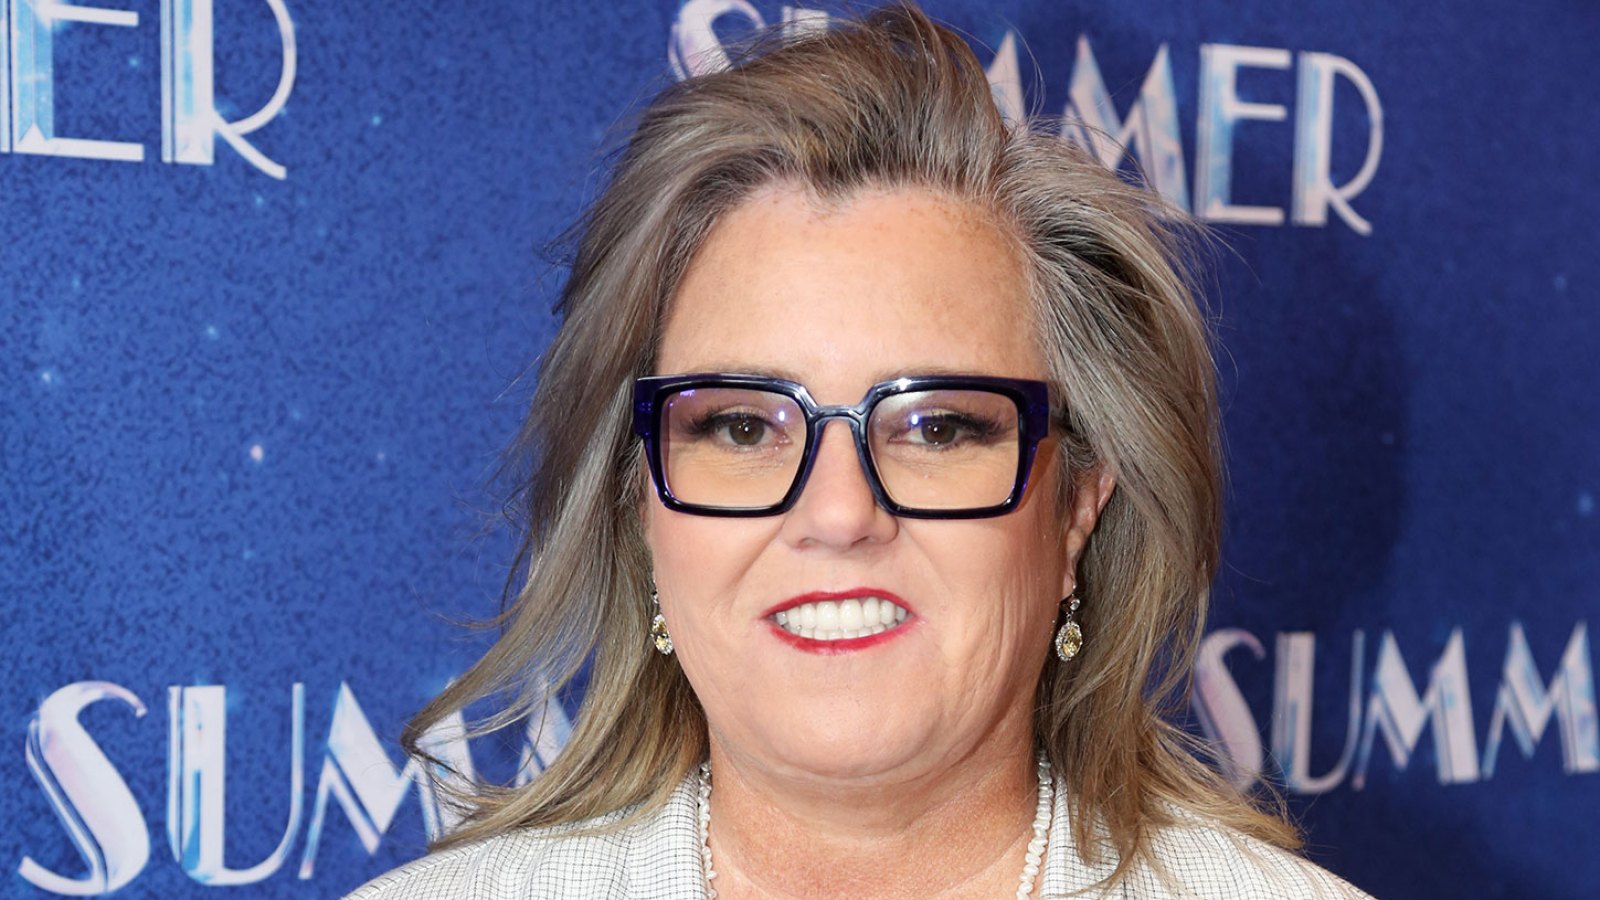 Rosie O'Donnell today show grandma